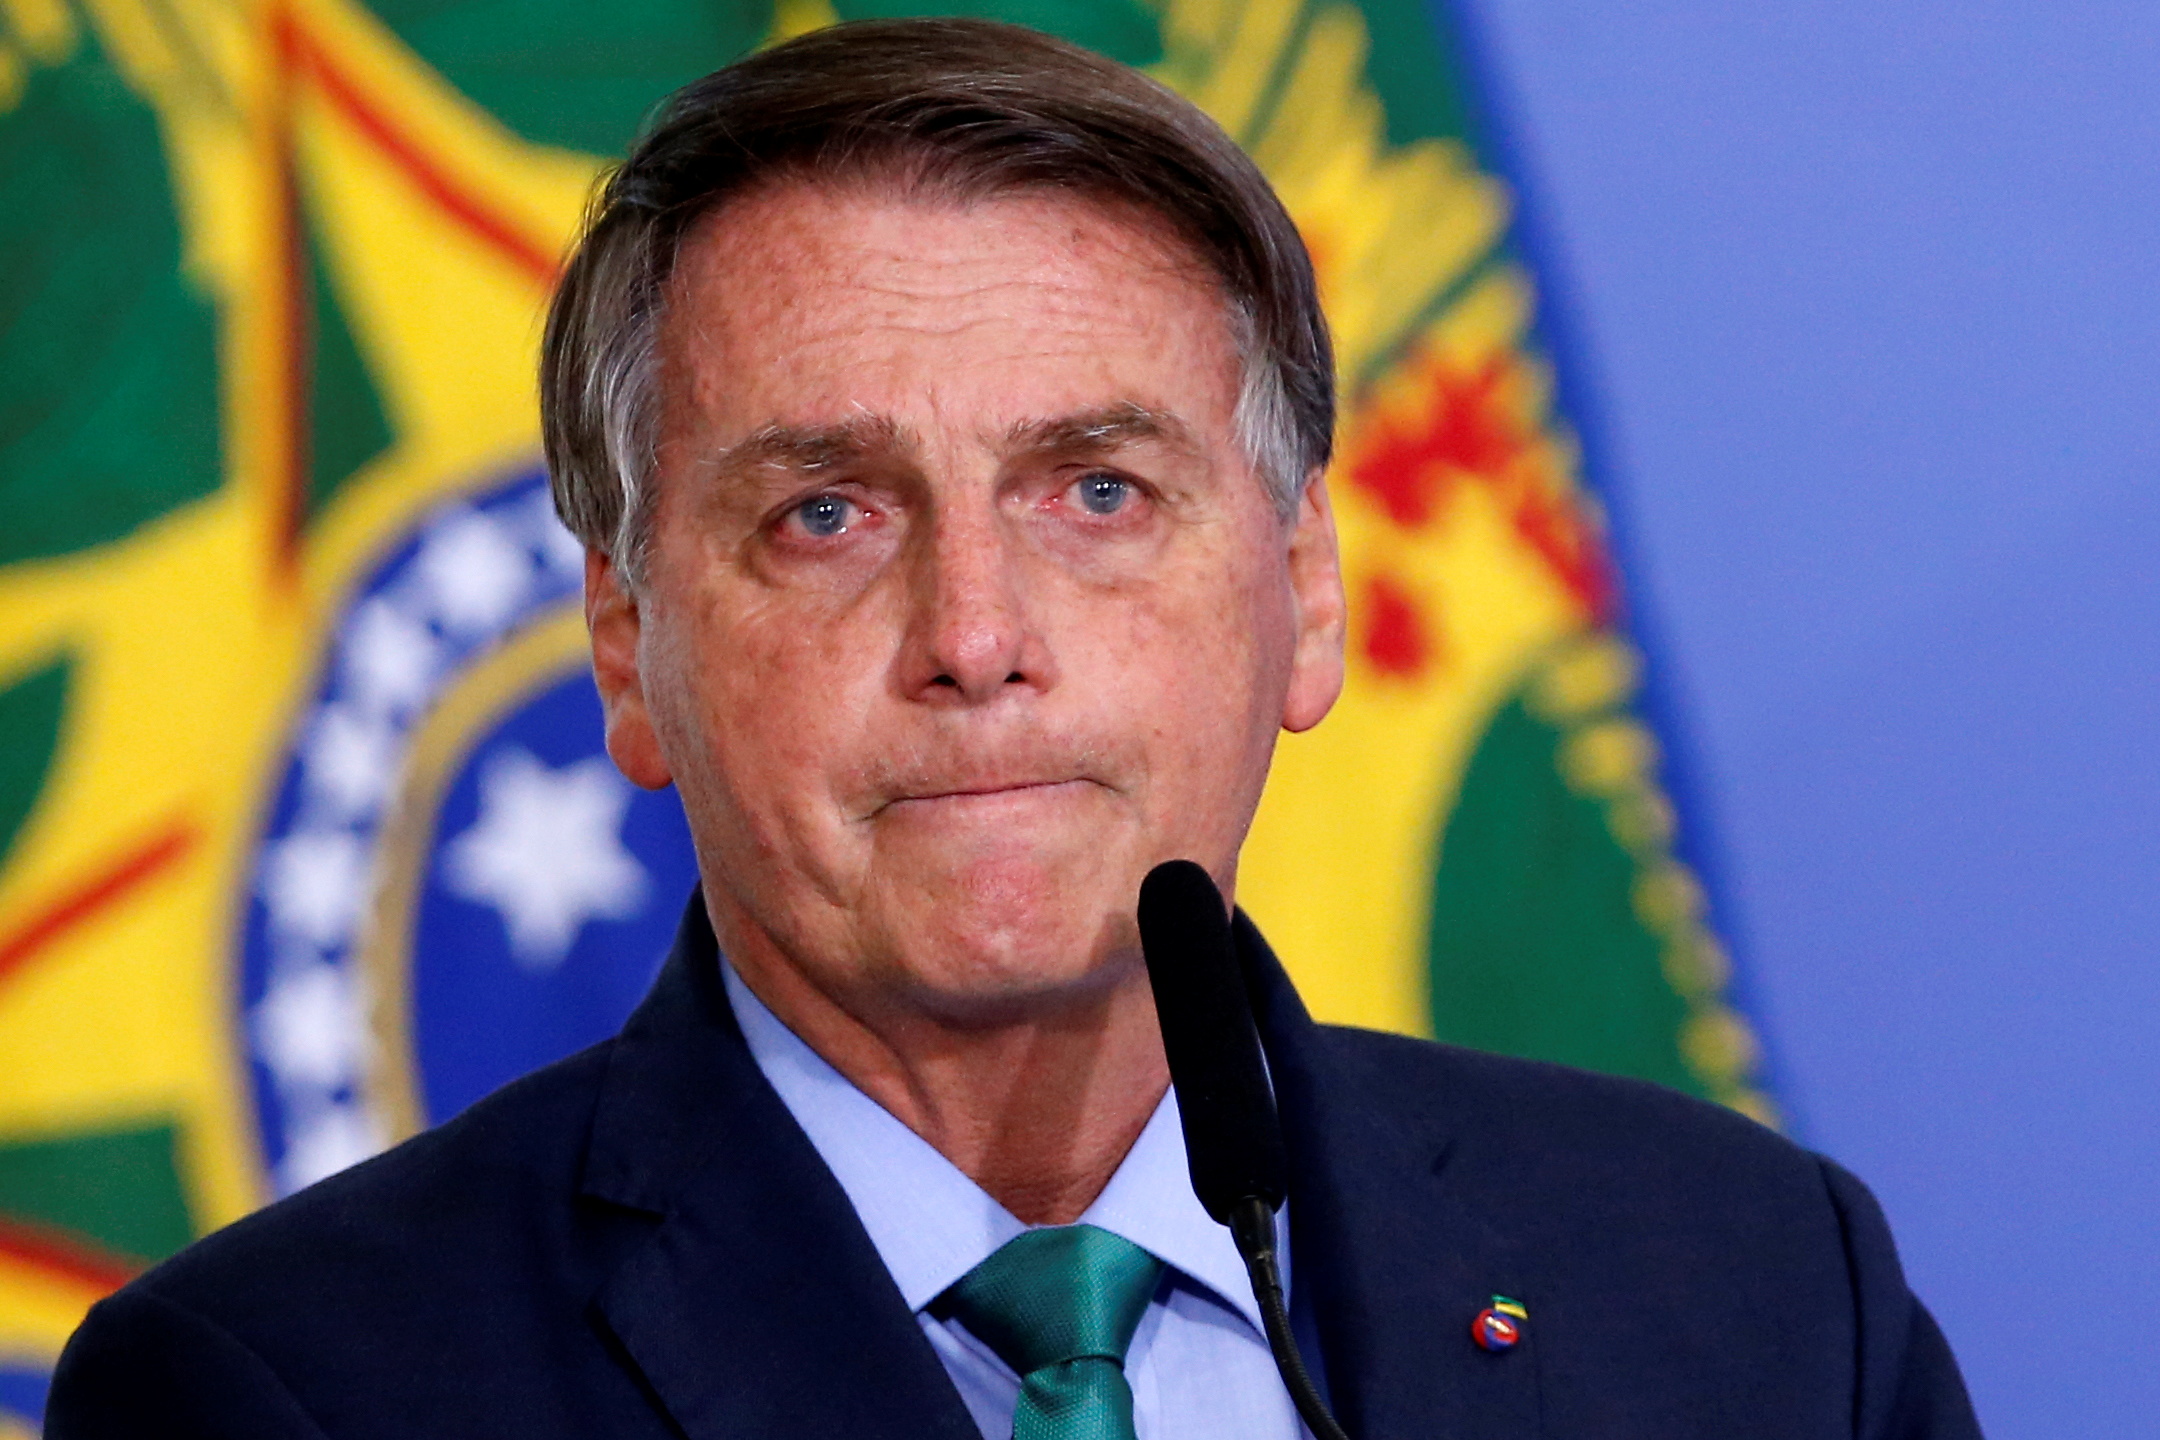 Brazil's President Jair Bolsonaro looks on during a ceremony at the Planalto Palace in Brazil